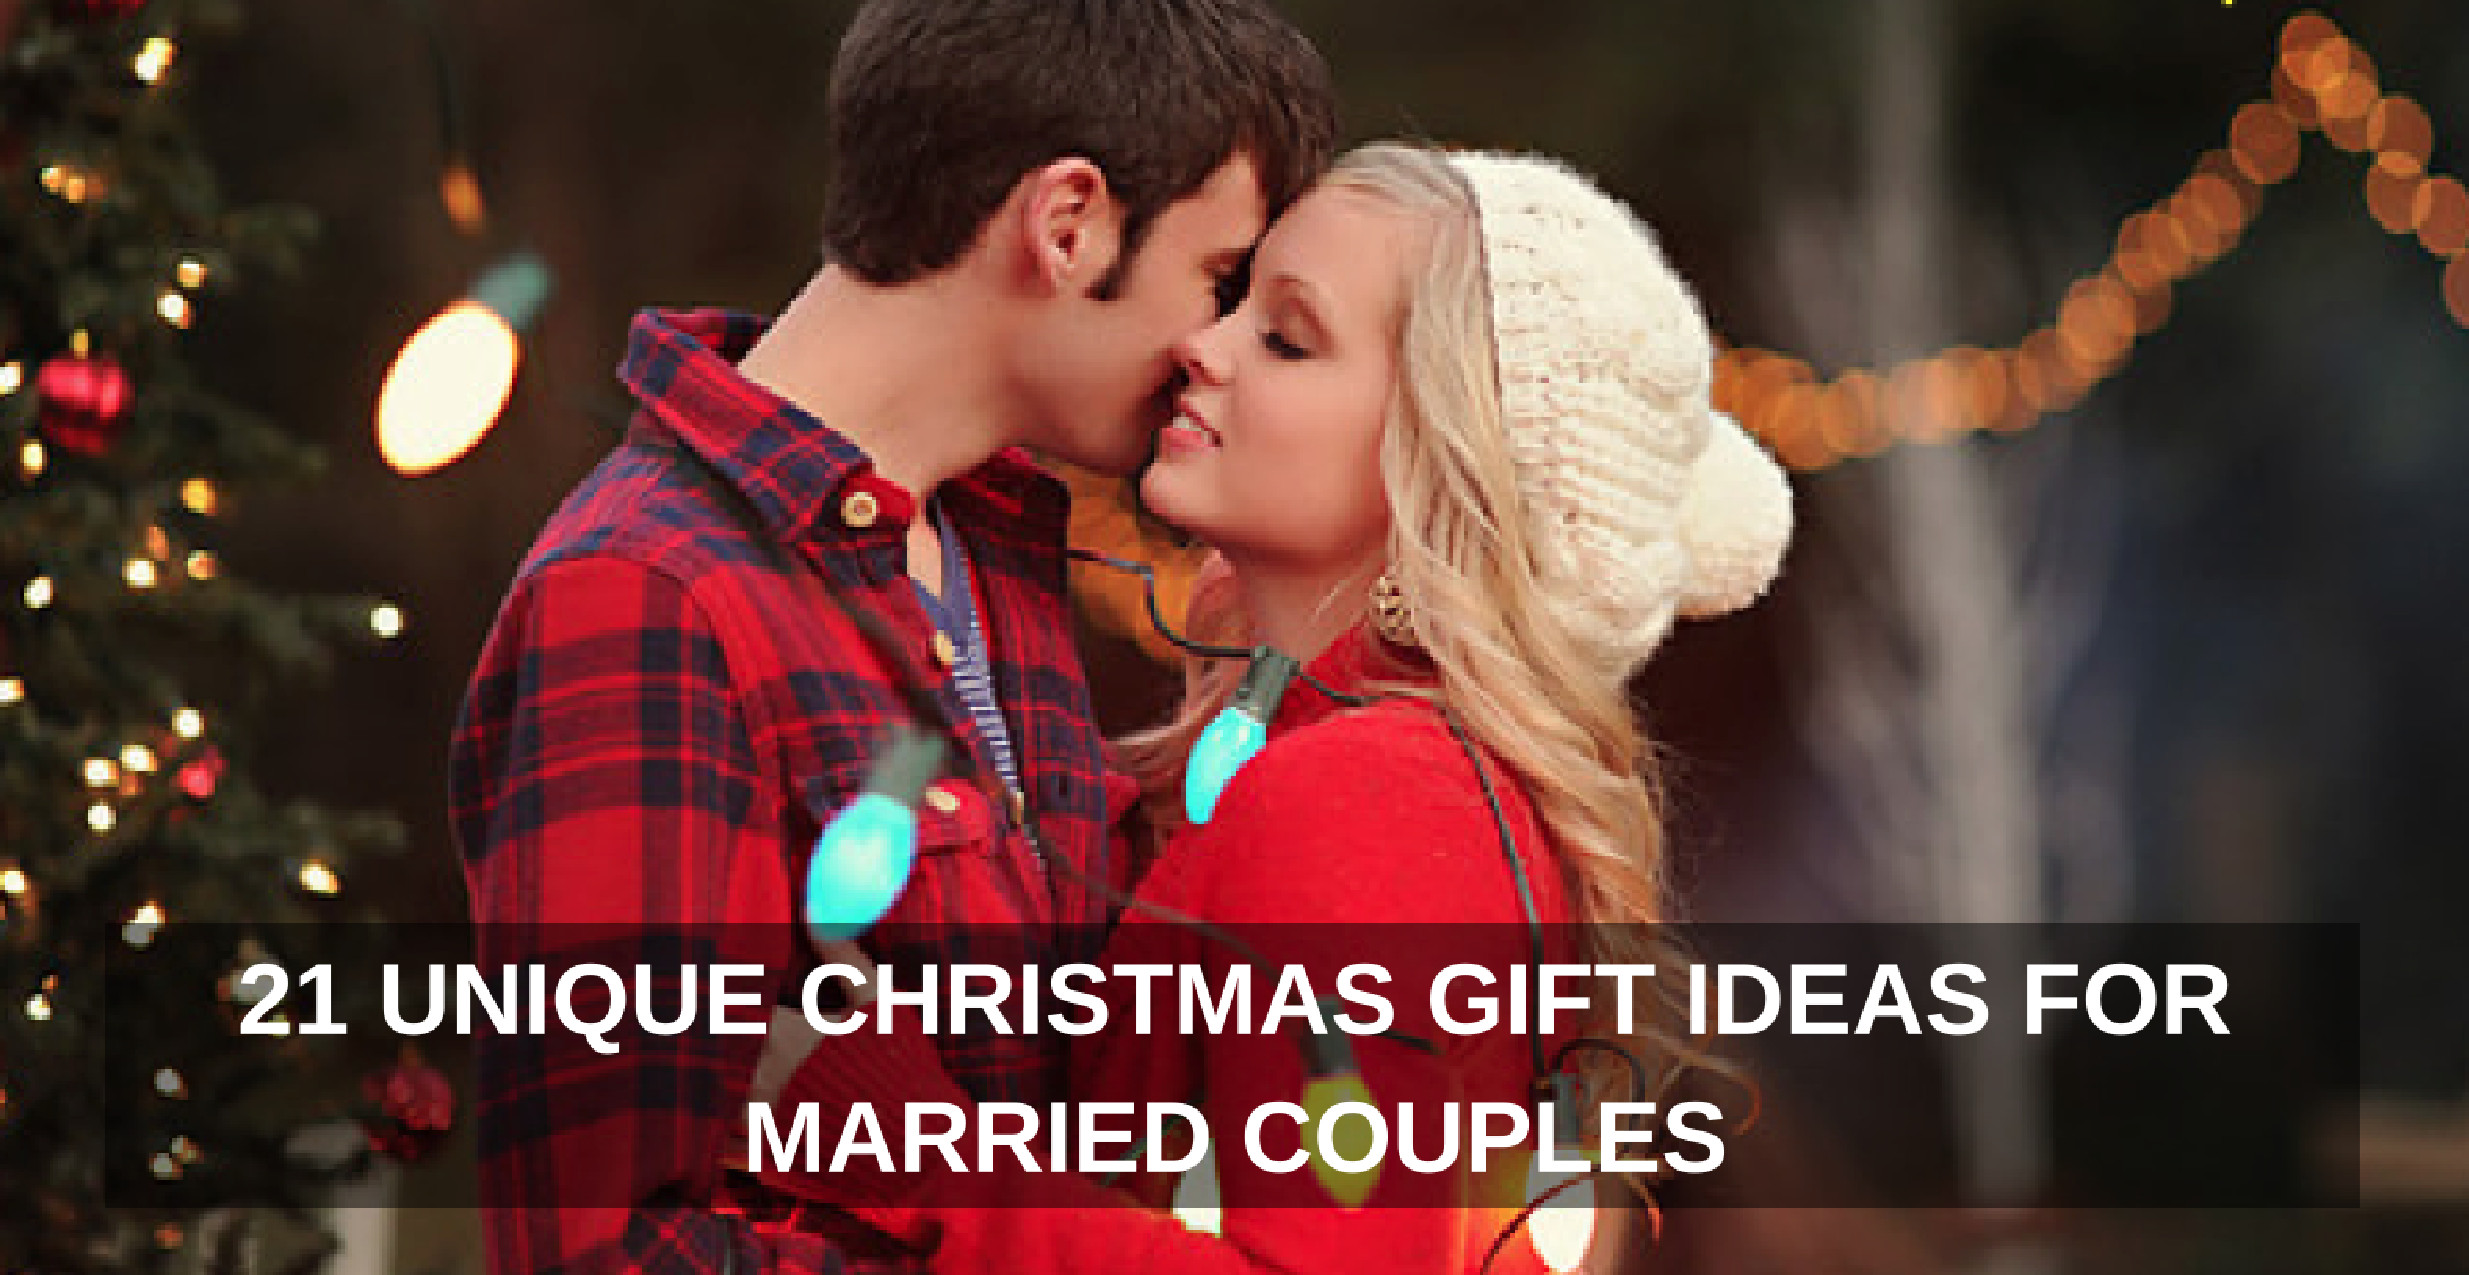 Unique Gift Ideas For Couples
 21 Unique Christmas Gift Ideas for Married Couples